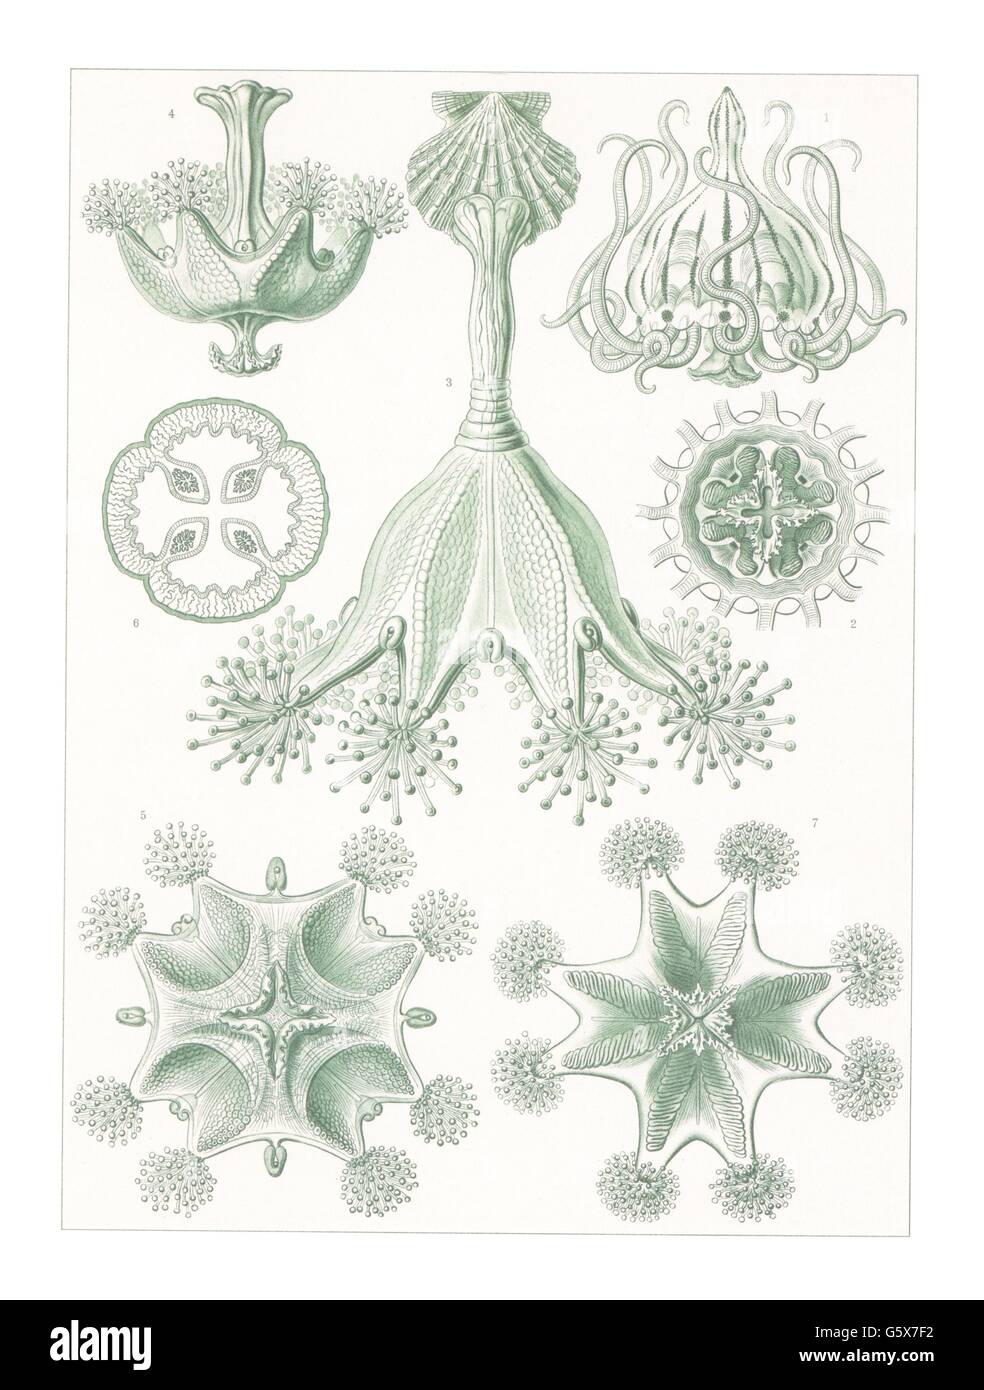 zoology / animals, cnidaria, stalked jellyfishes (Stauromedusae), colour lithograph, out of: Ernst Haeckel, 'Kunstformen der Natur', Leipzig - Vienna, 1899 - 1904, Additional-Rights-Clearences-Not Available Stock Photo